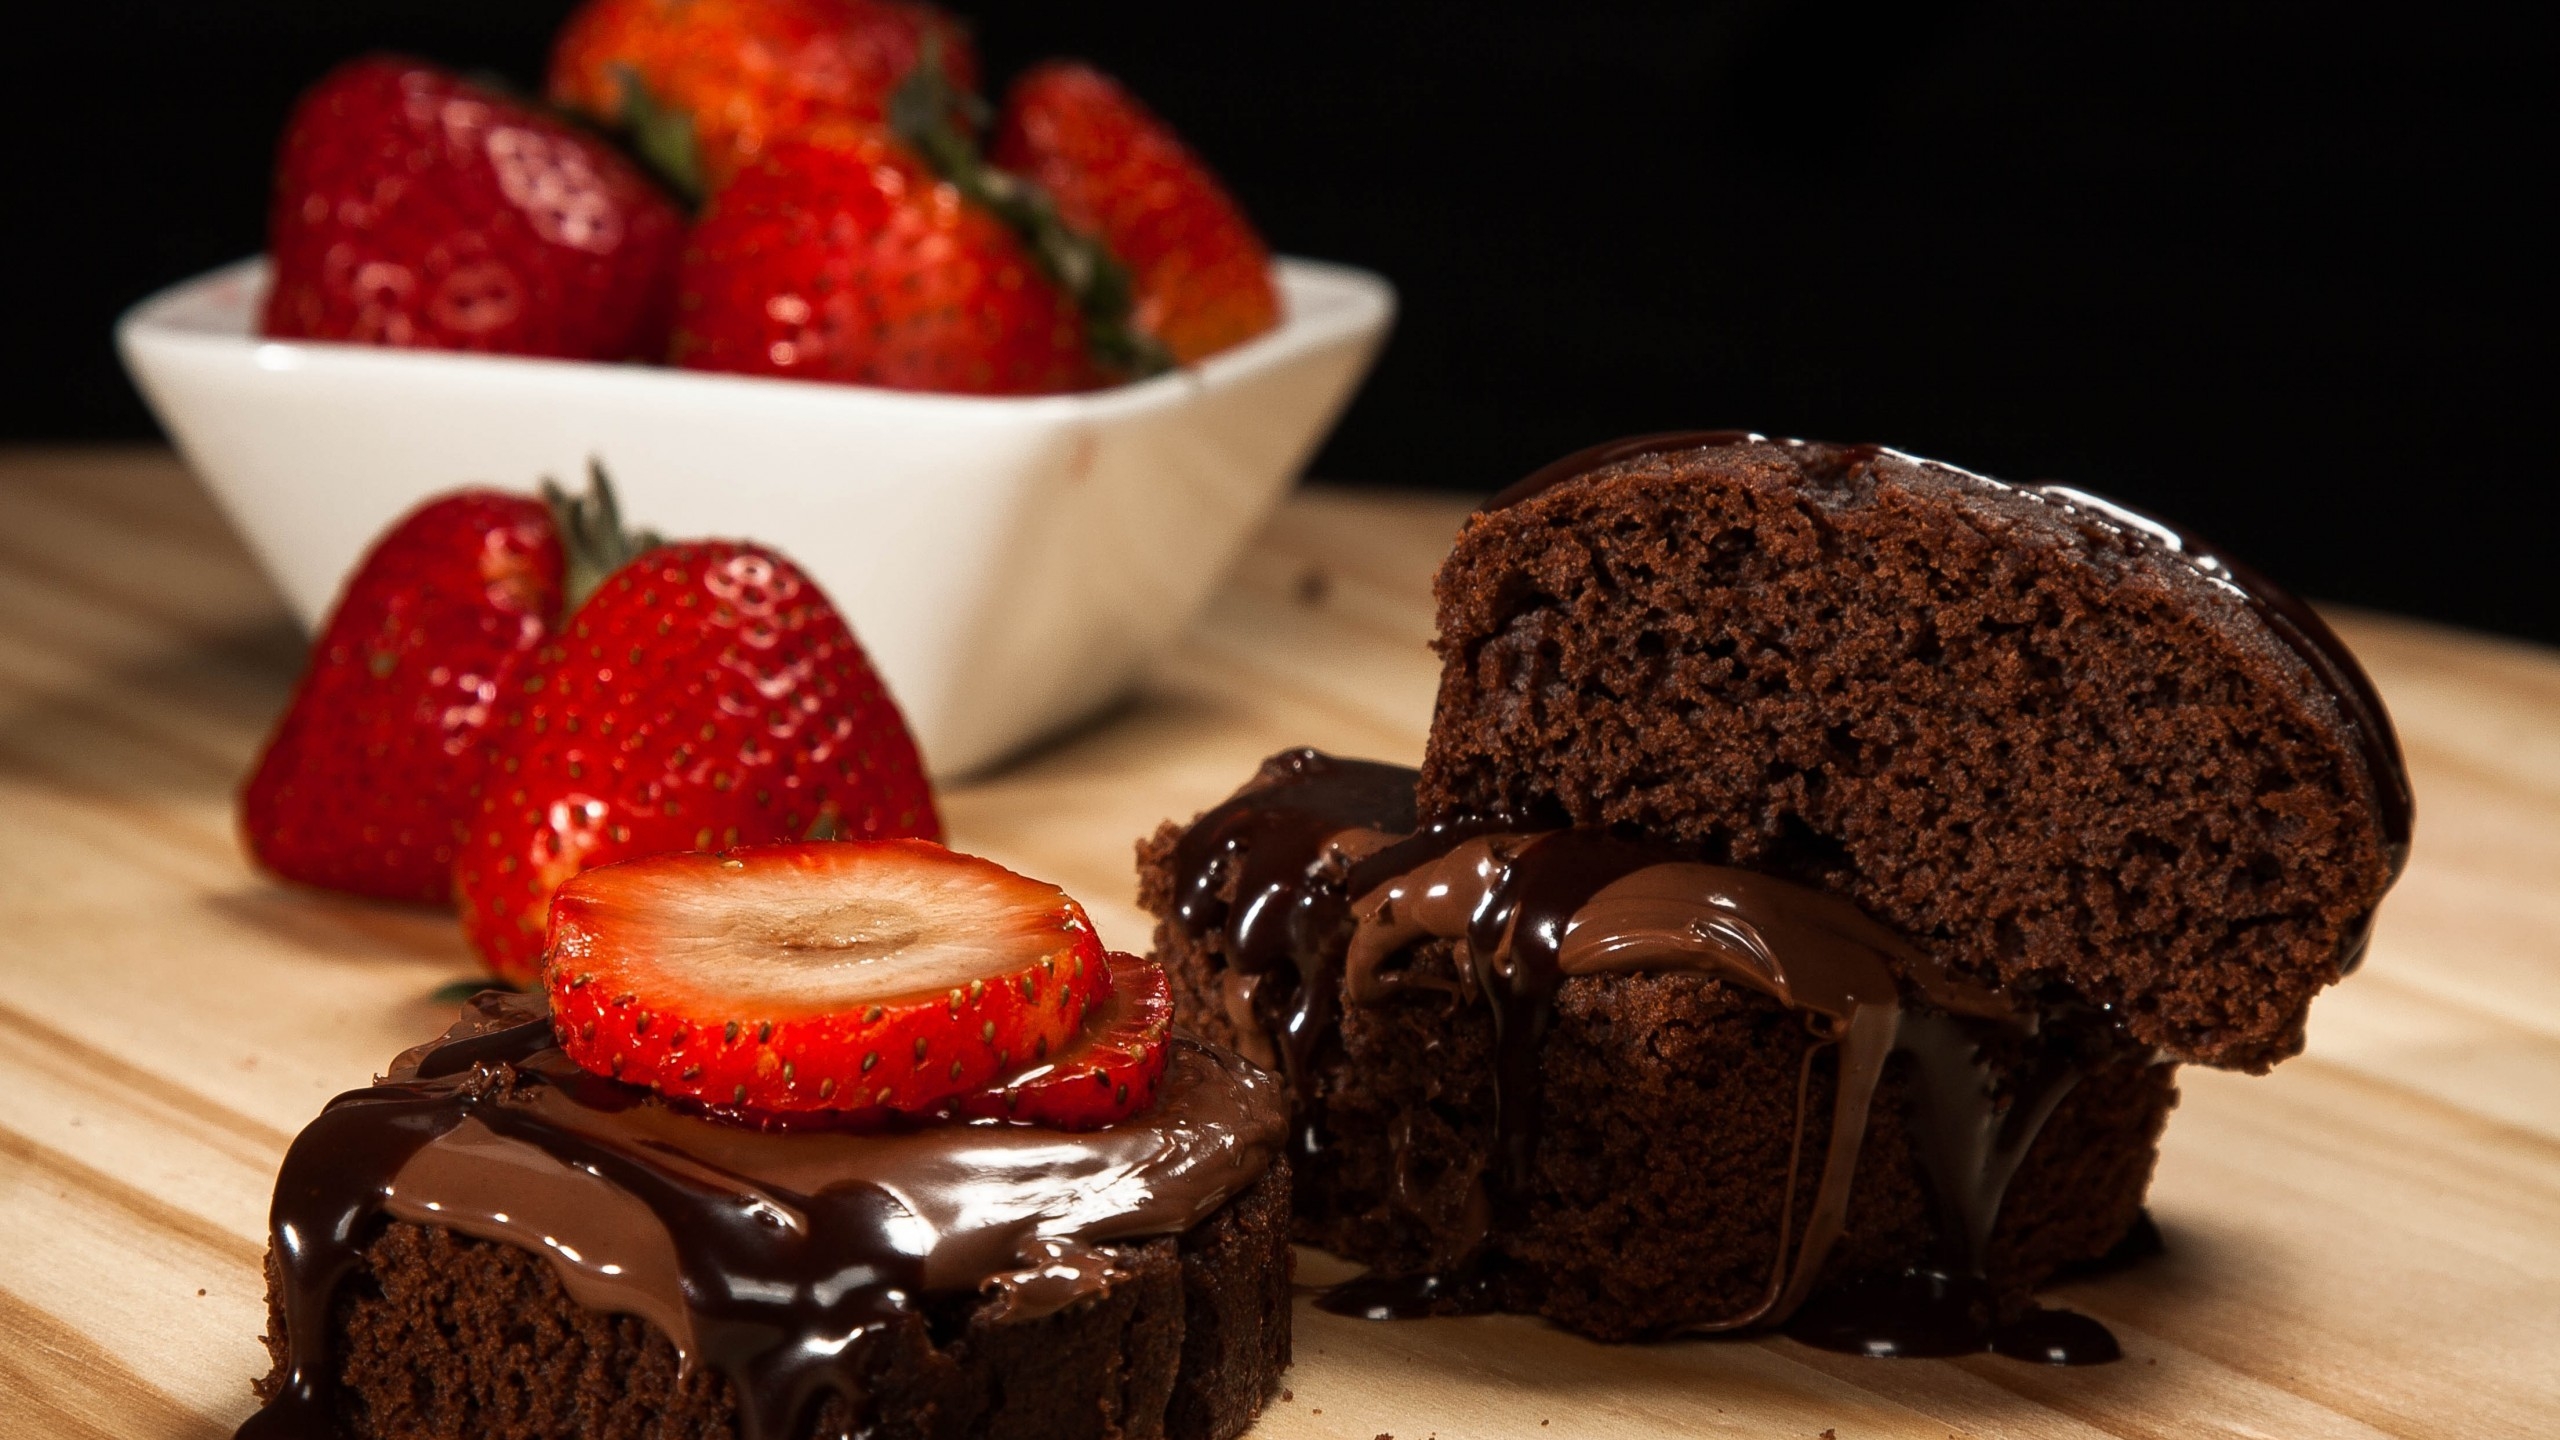 Chocolate and Strawberry Cake for 2560x1440 HDTV resolution